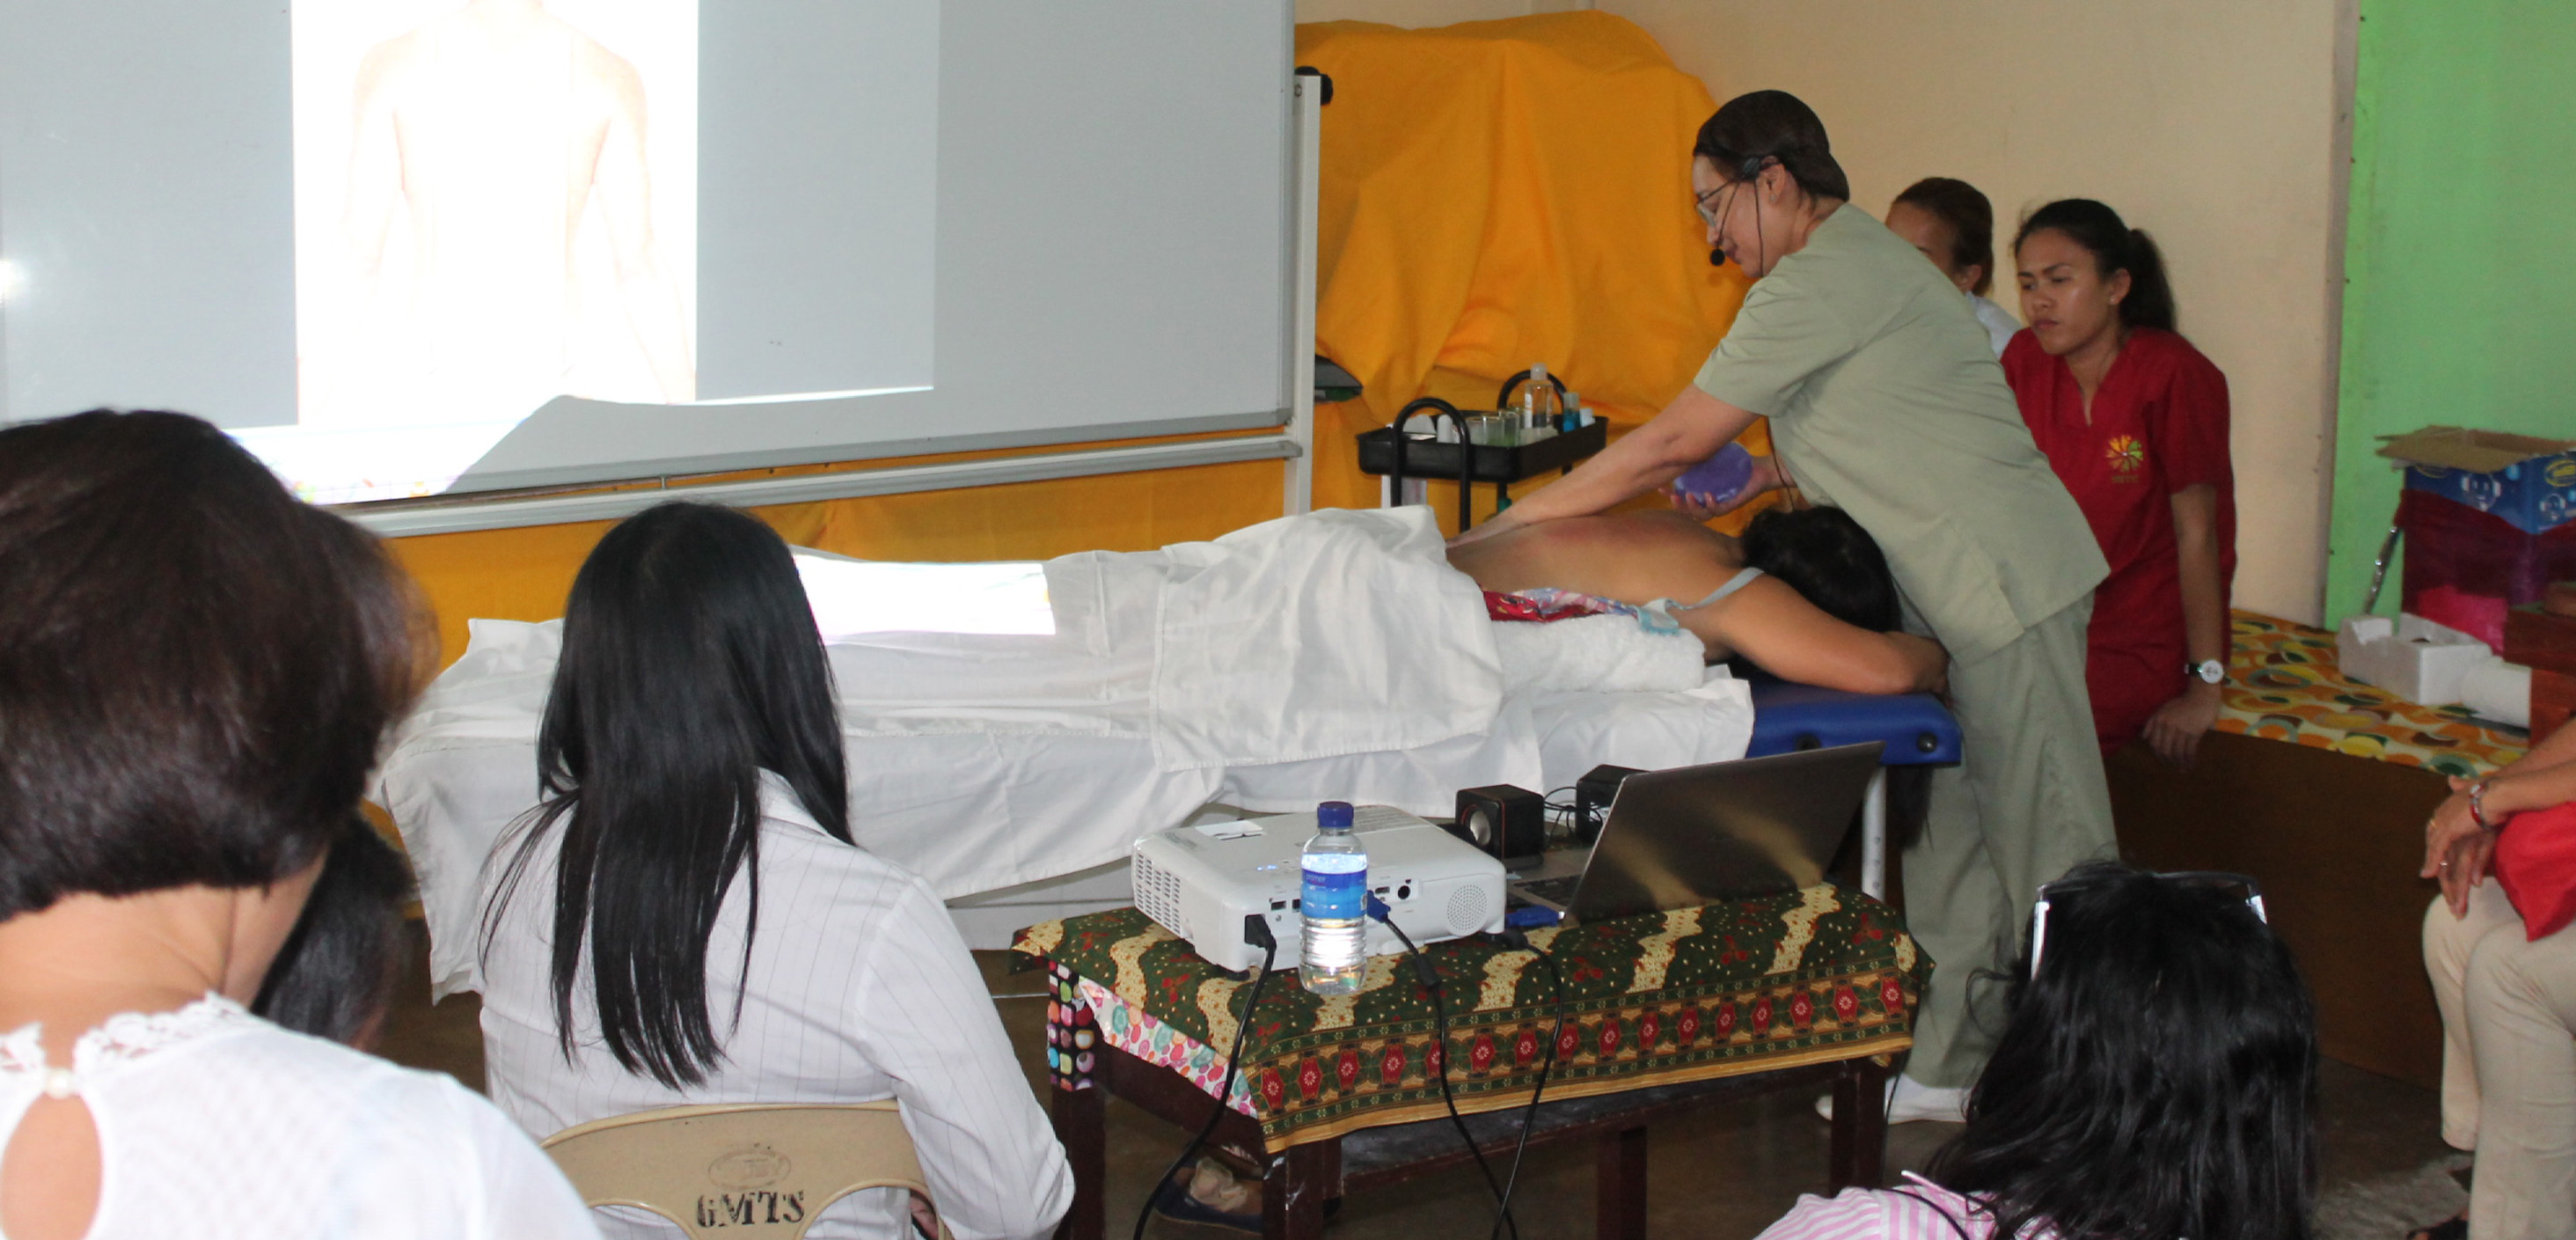 "Hilot" wellness massage is one of the skills featured in the seminar workshop.